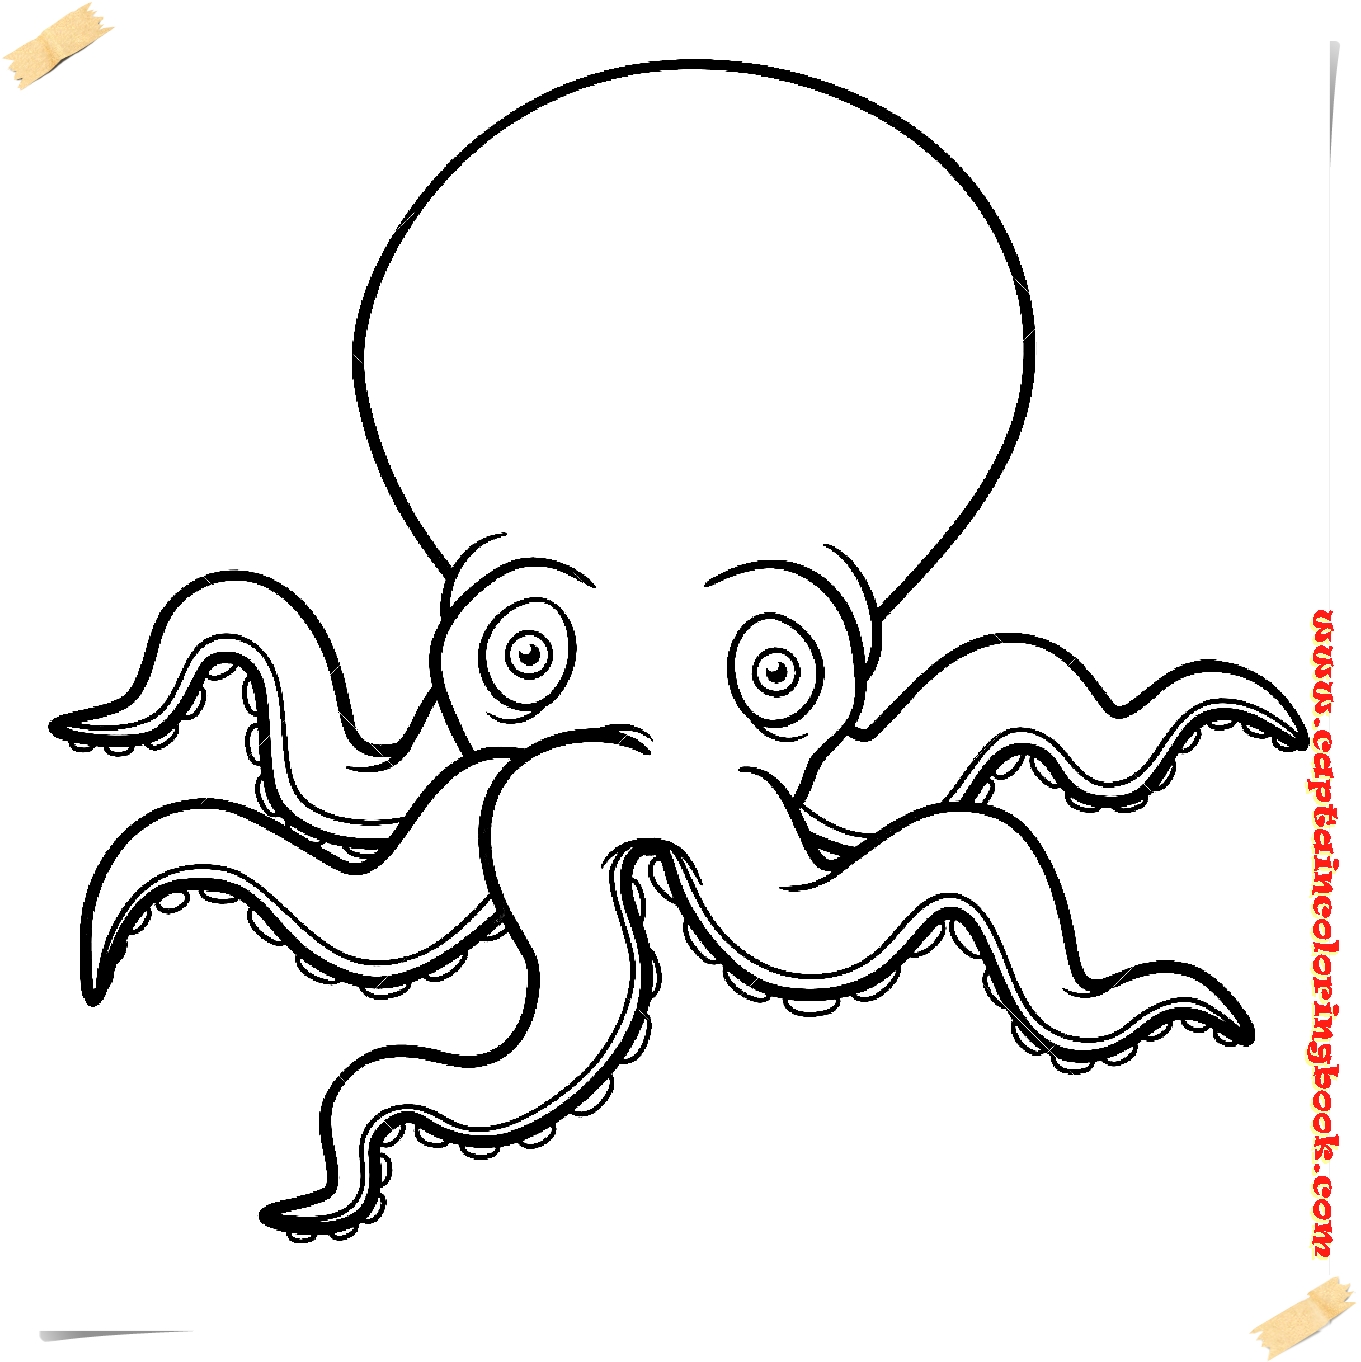 Octopus Coloring Page Free Use the free printable octopus craft